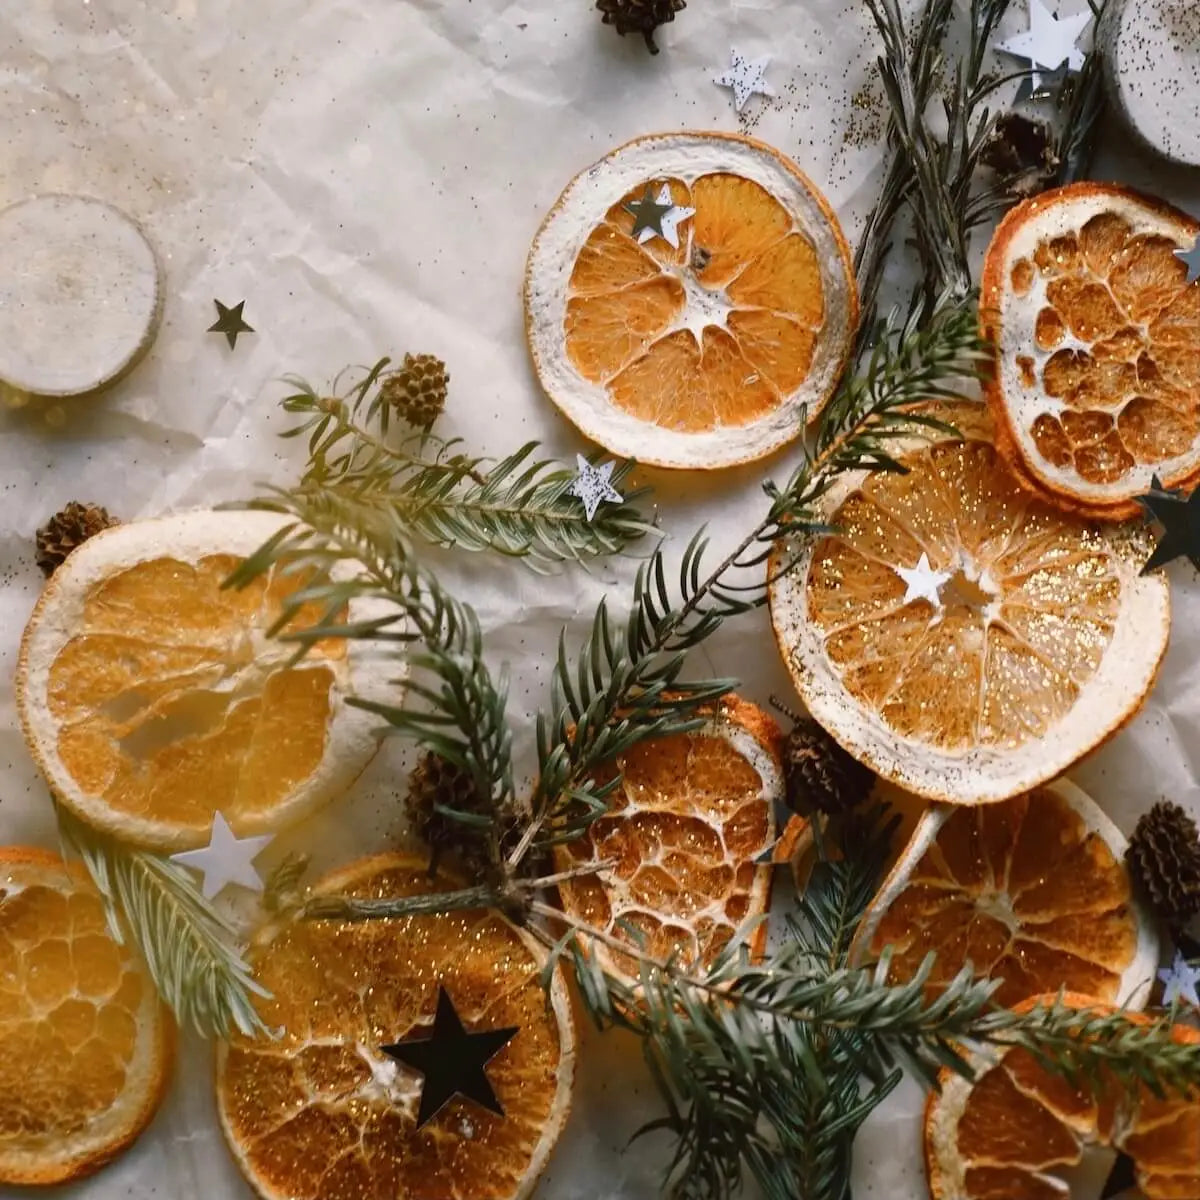 A flatlay of slices of orange, glittery stars and pine tree branches.